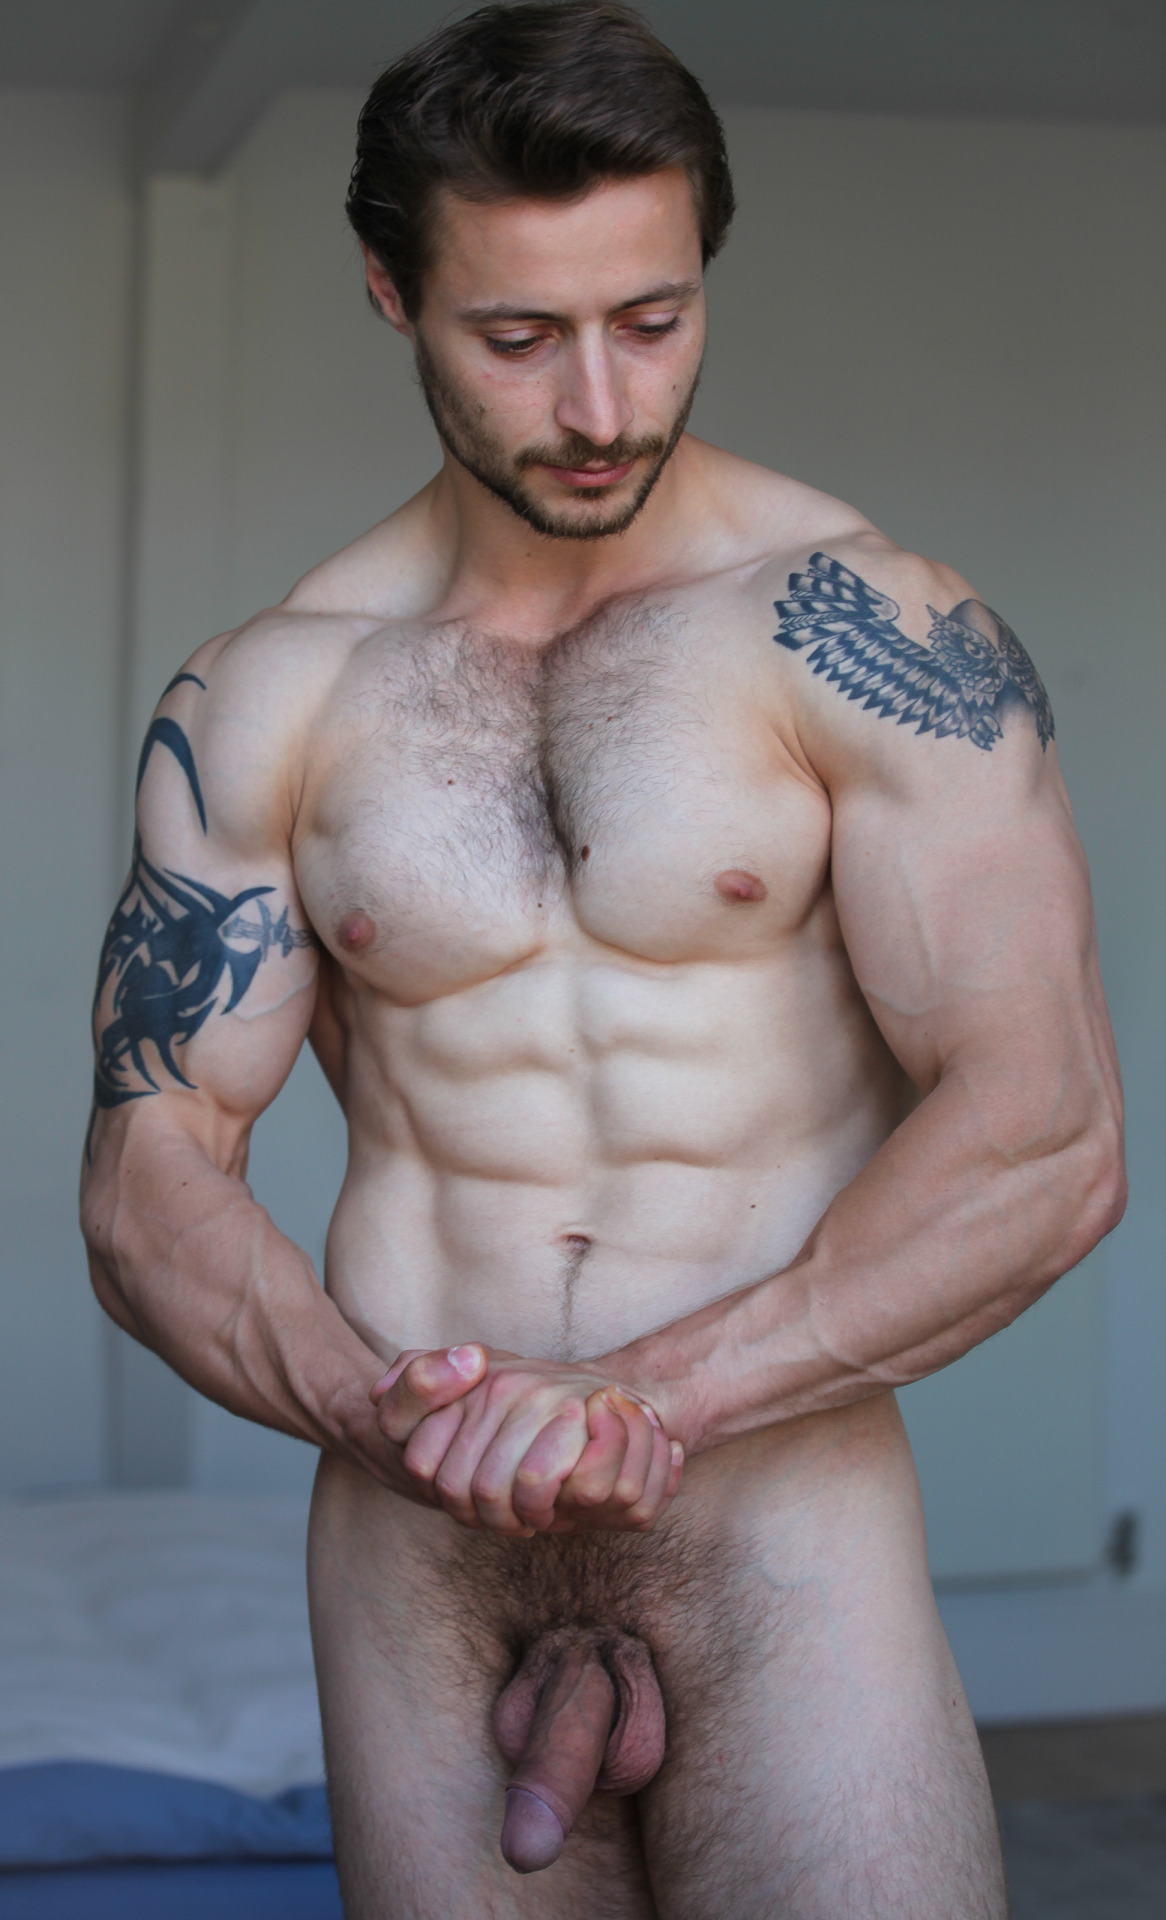 londfoto:
“Luc flexes those immense arms, fully nude, from recent shoot
”